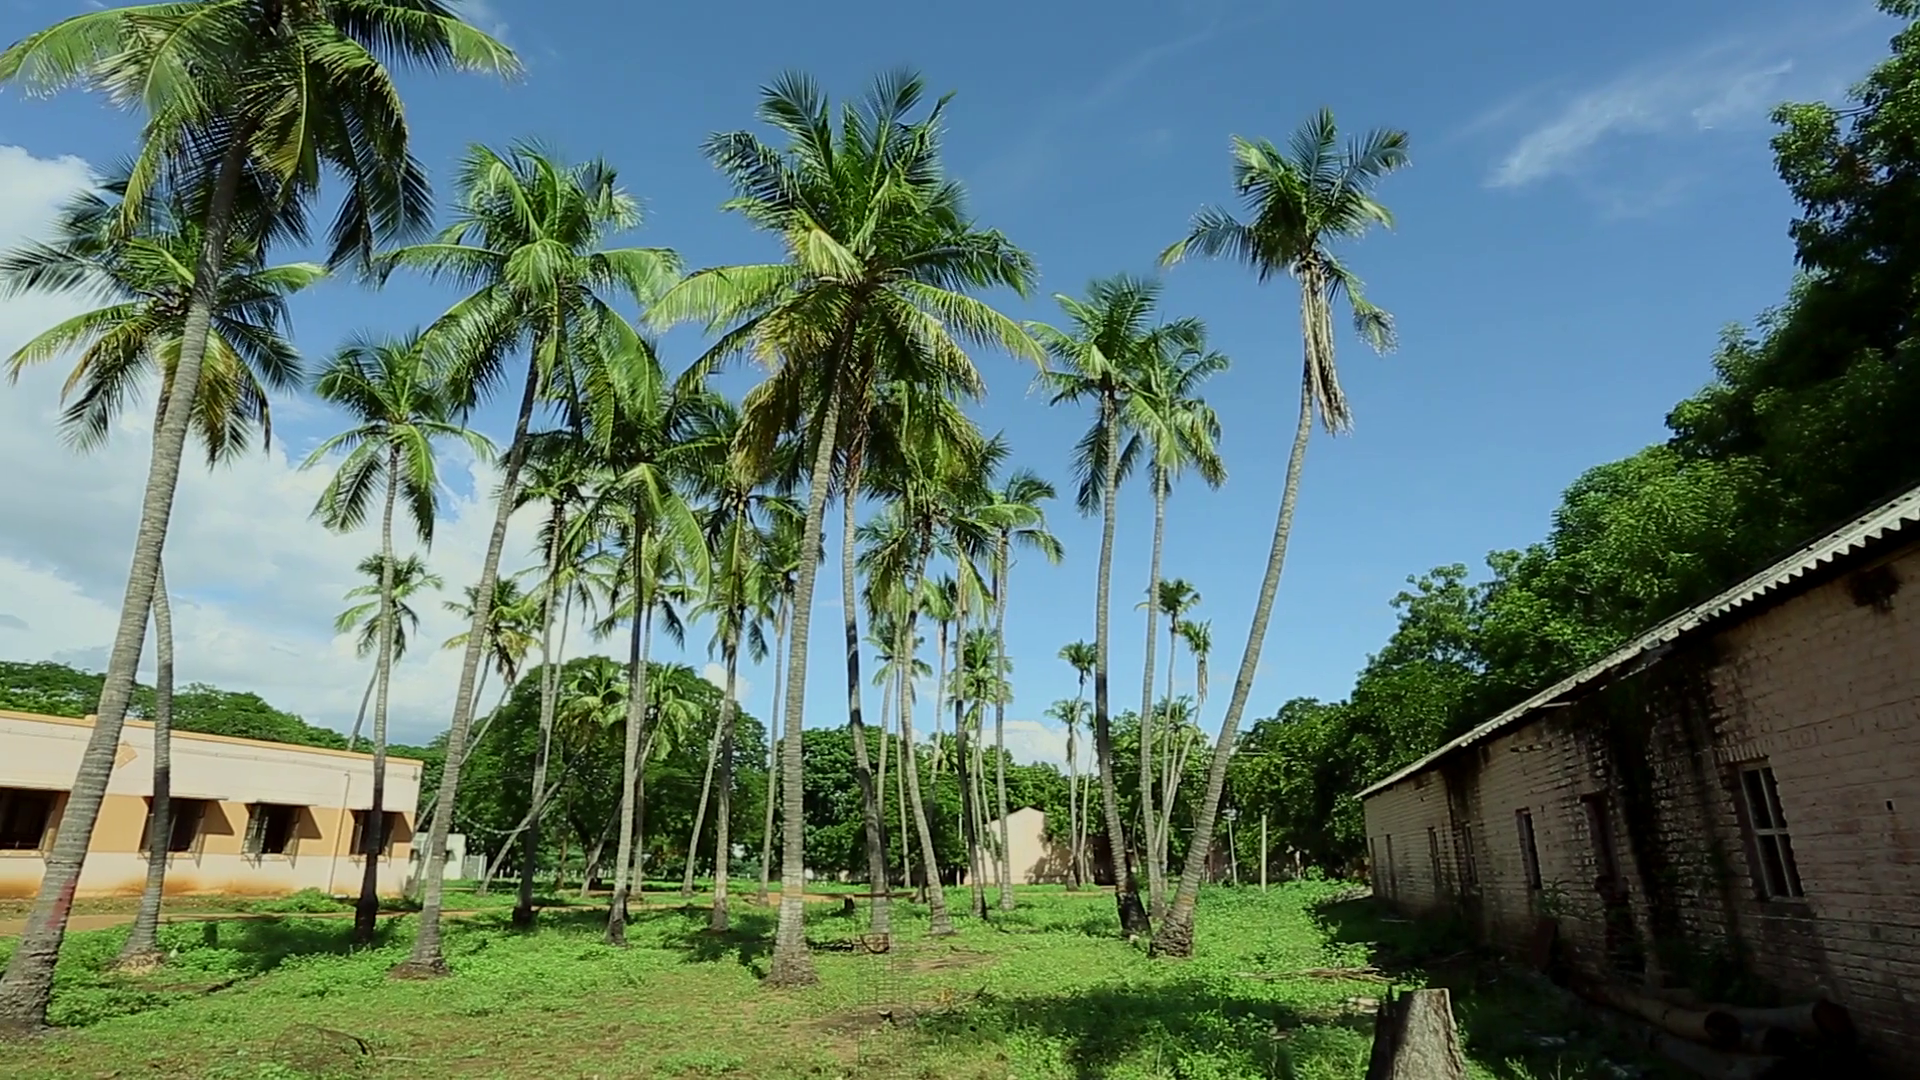 Pan Left Coconut Trees With House In The Background In The India ...